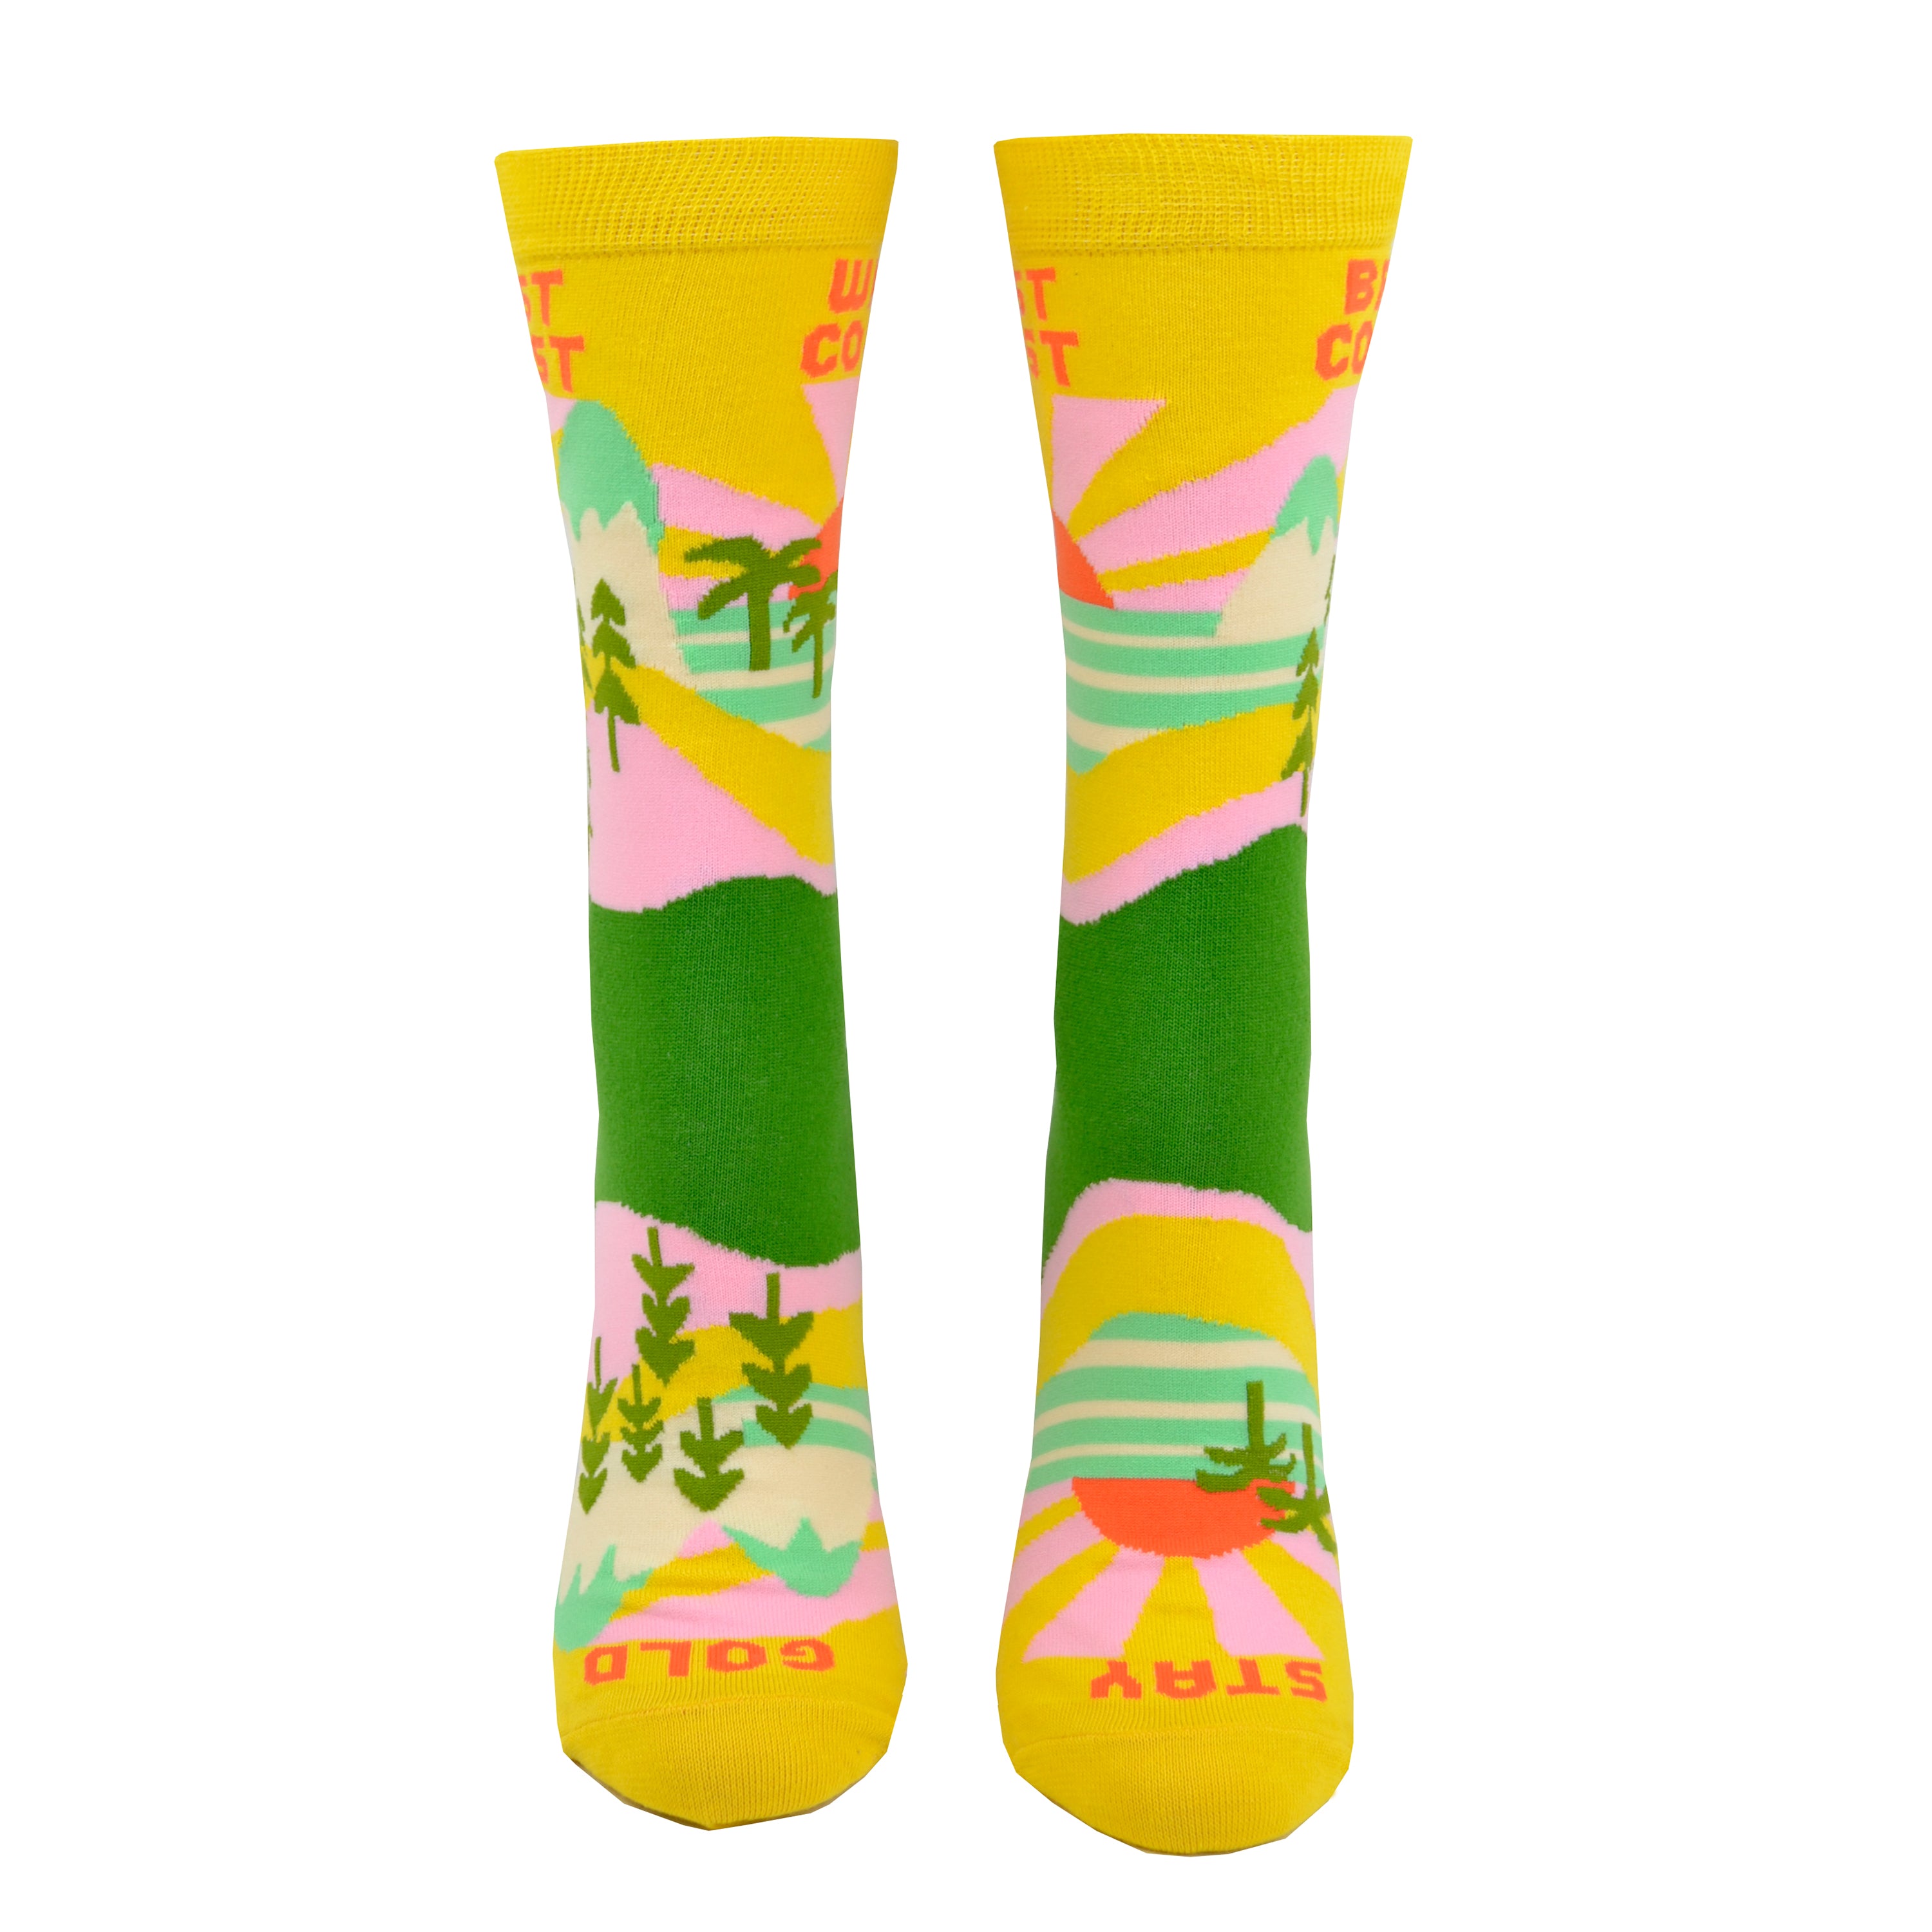 A front view on a leg form, these yellow cotton women's novelty crew socks by the brand Yellow Owl Workshop feature green trees, teal and white mountains, and pink clouds and say the words 